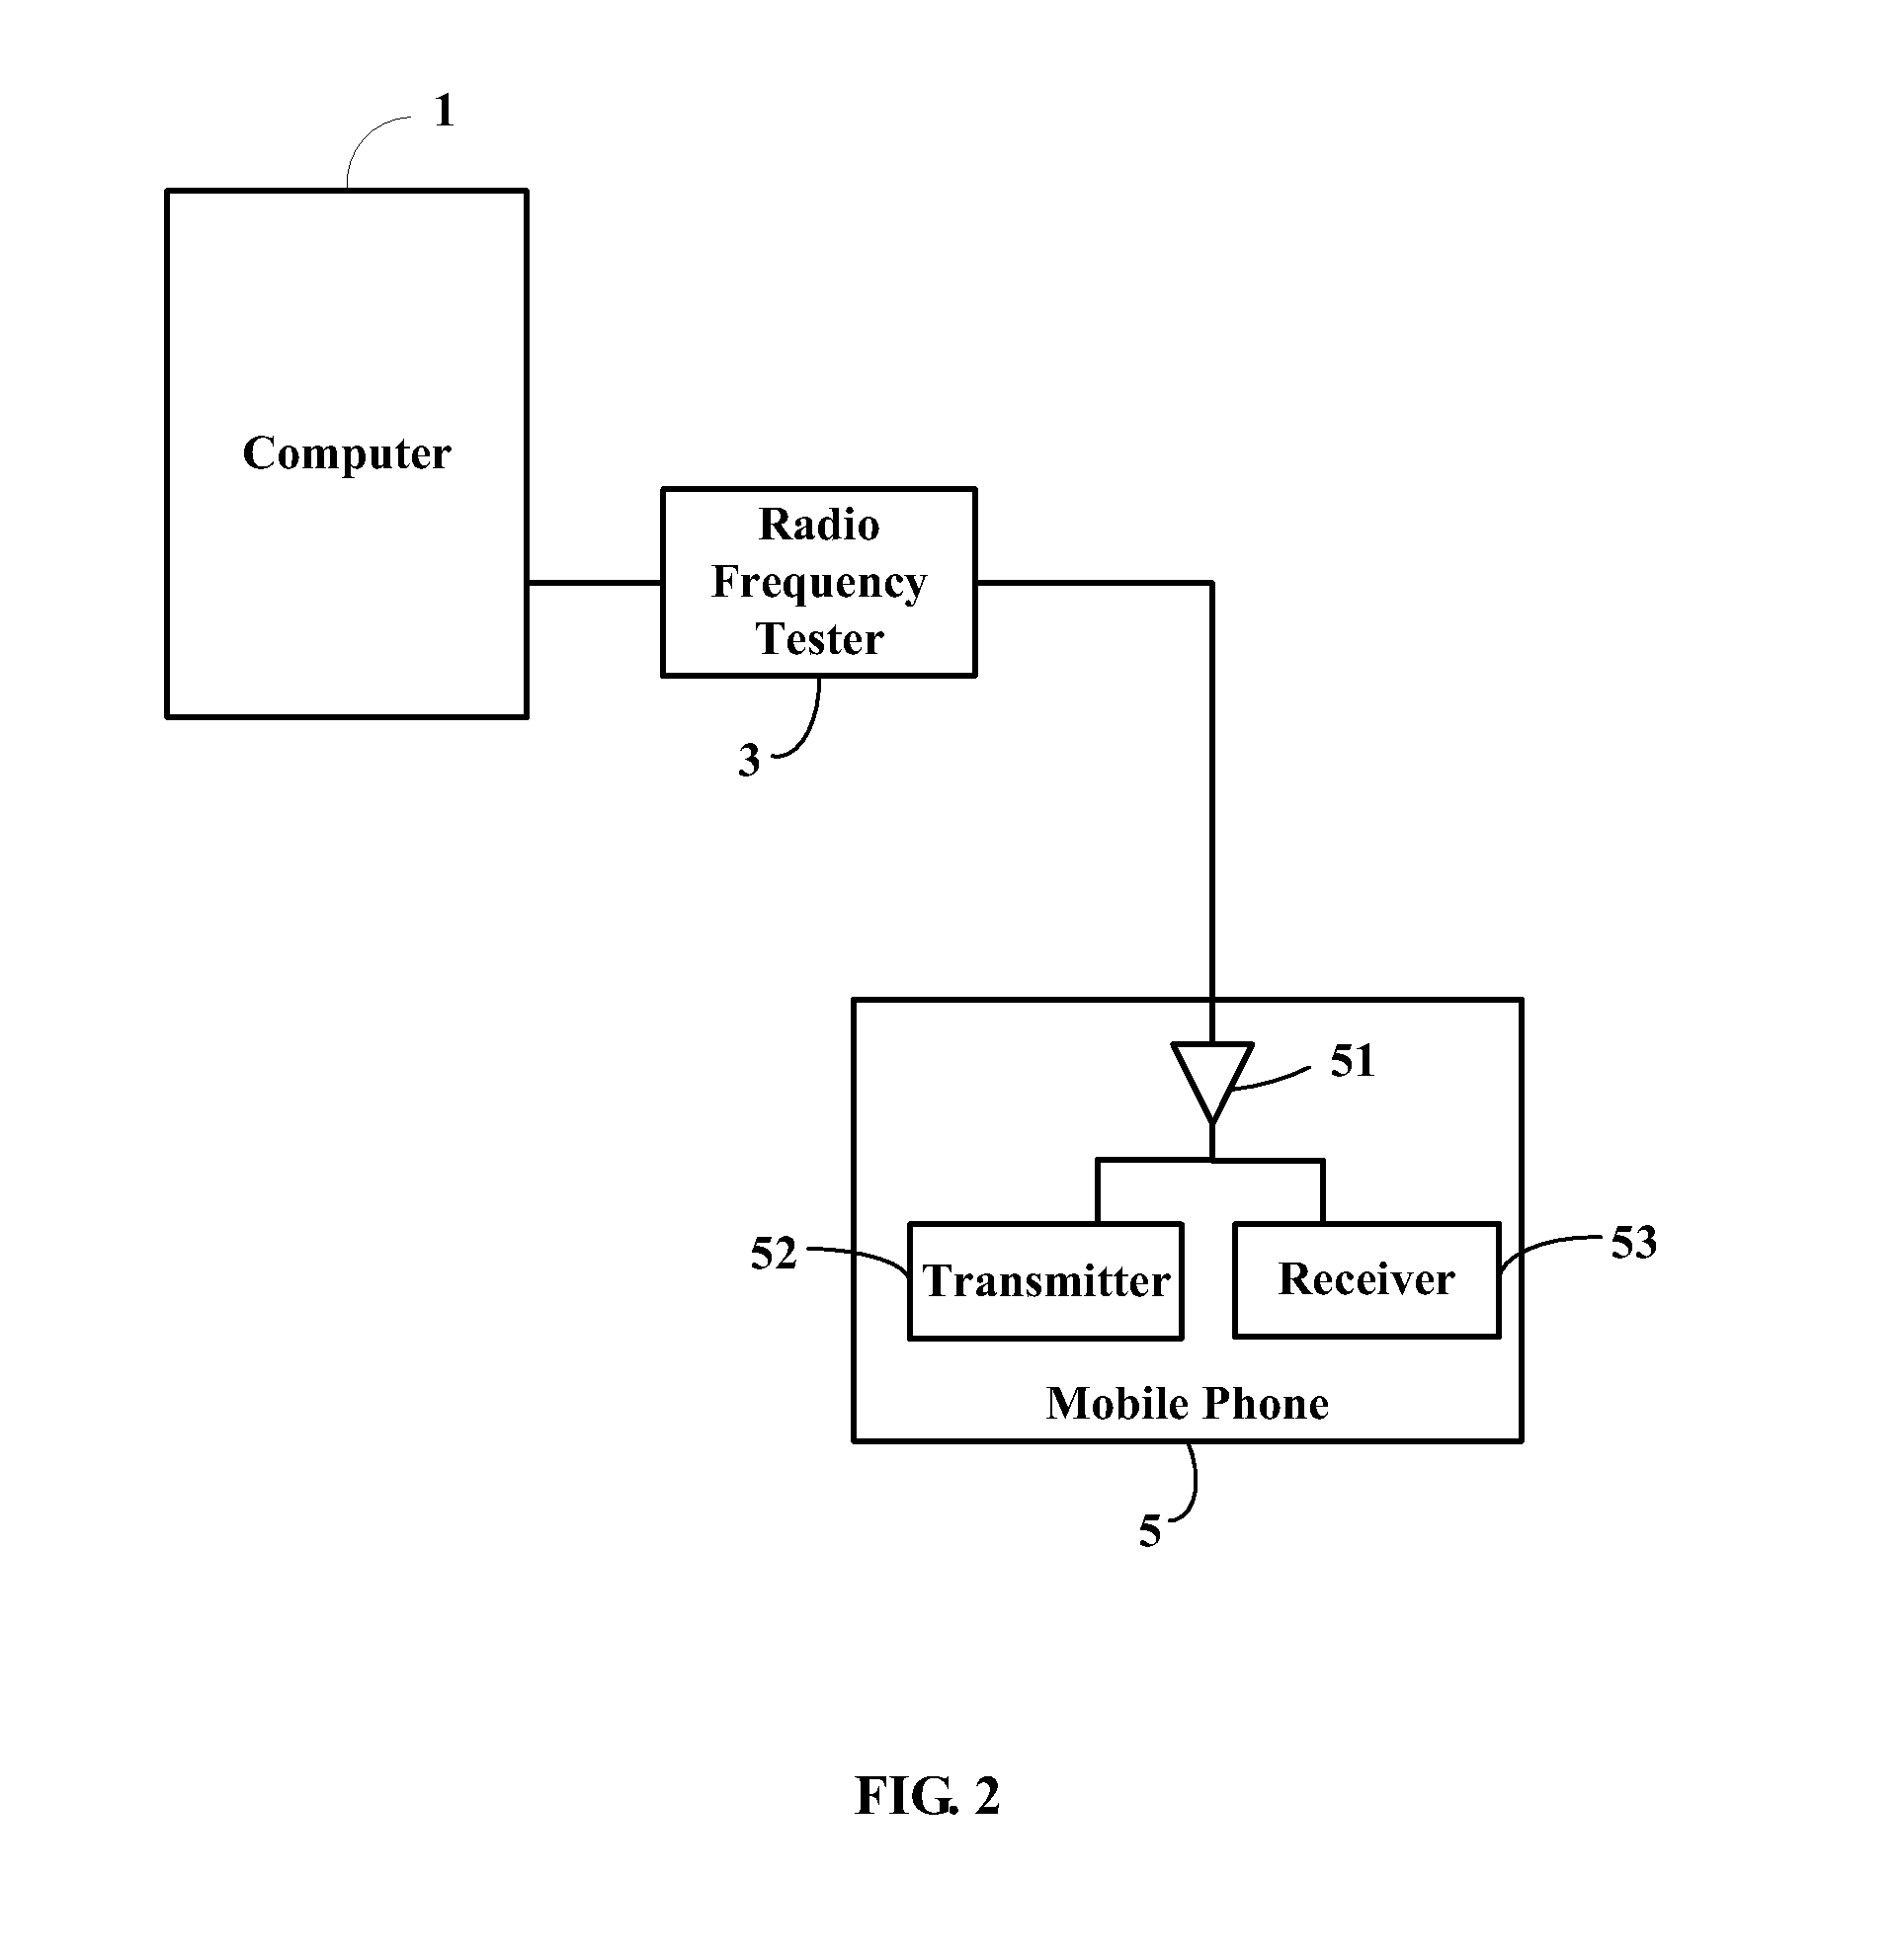 Method for performing a radio frequency test on a mobile phone